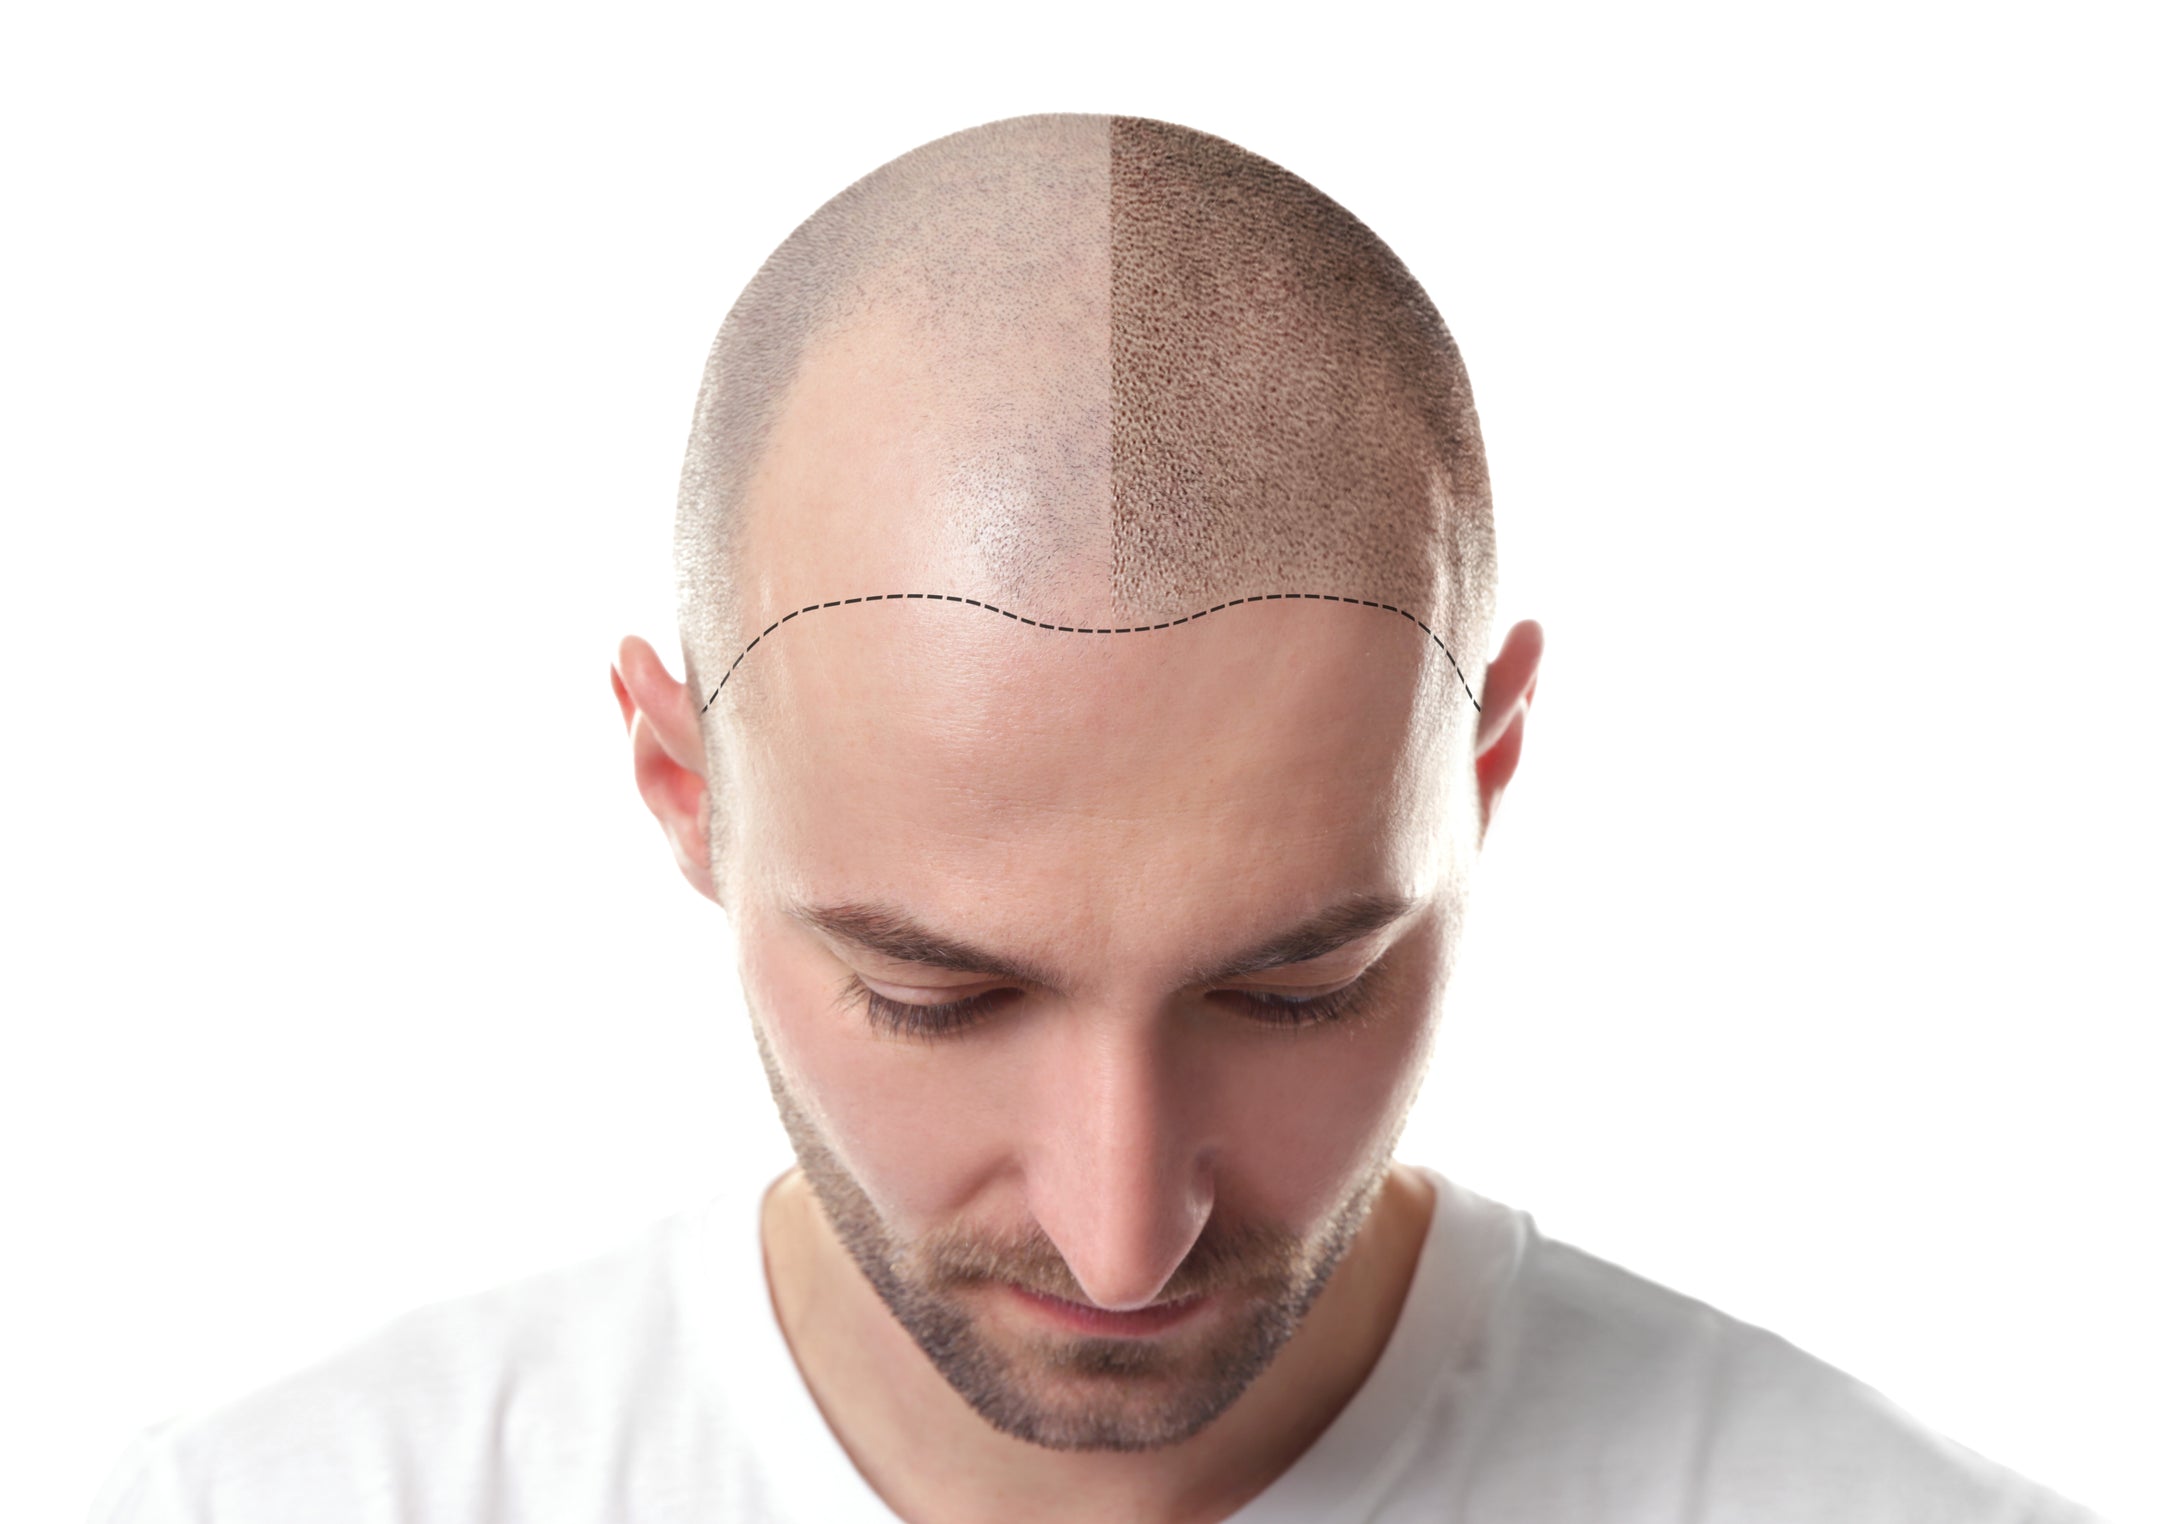 Hair loss and all the stages of the process